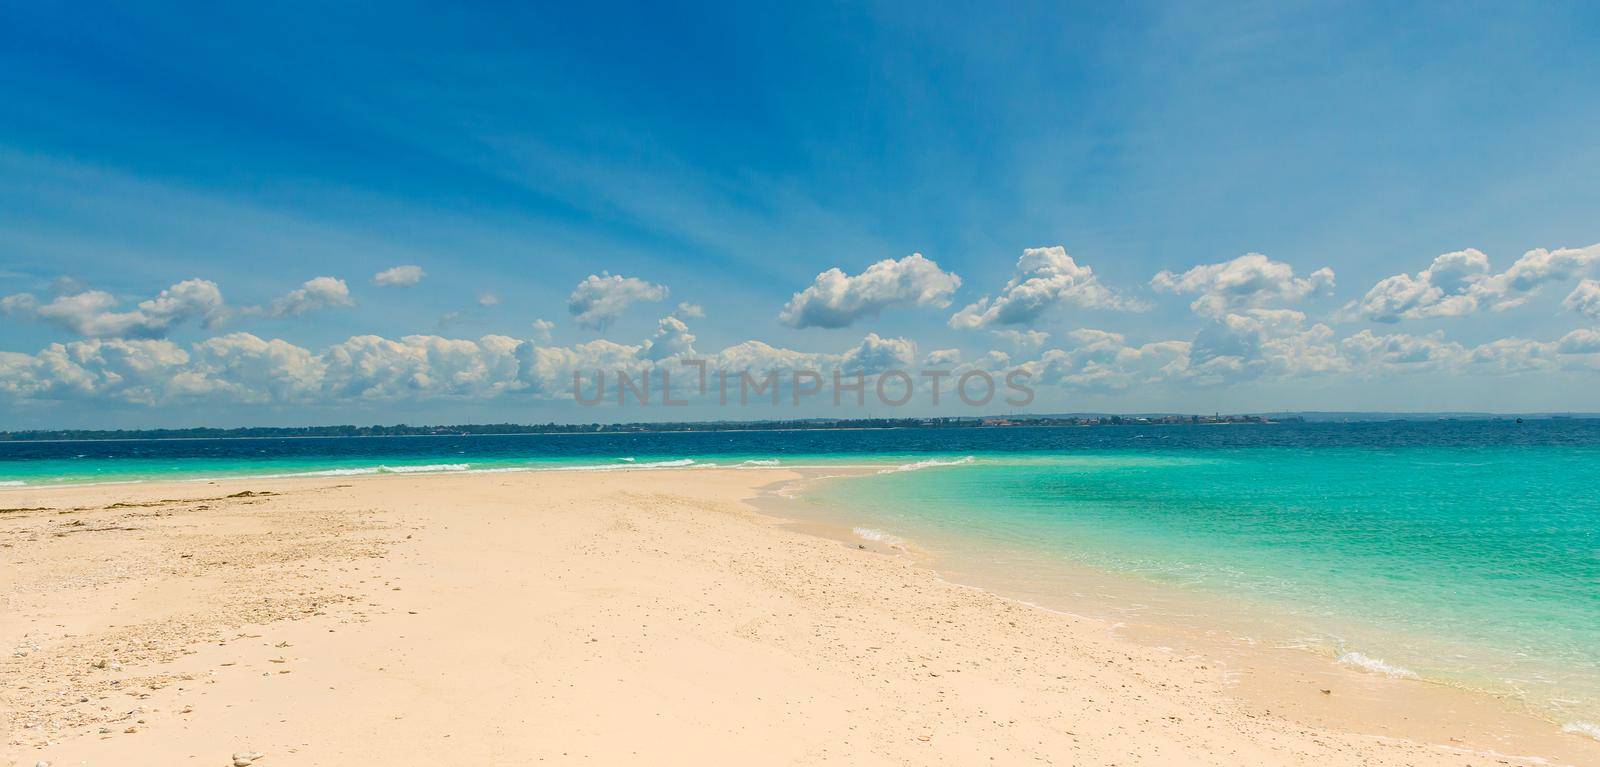 sandbank with transparent turquoise water and blue sky on the background